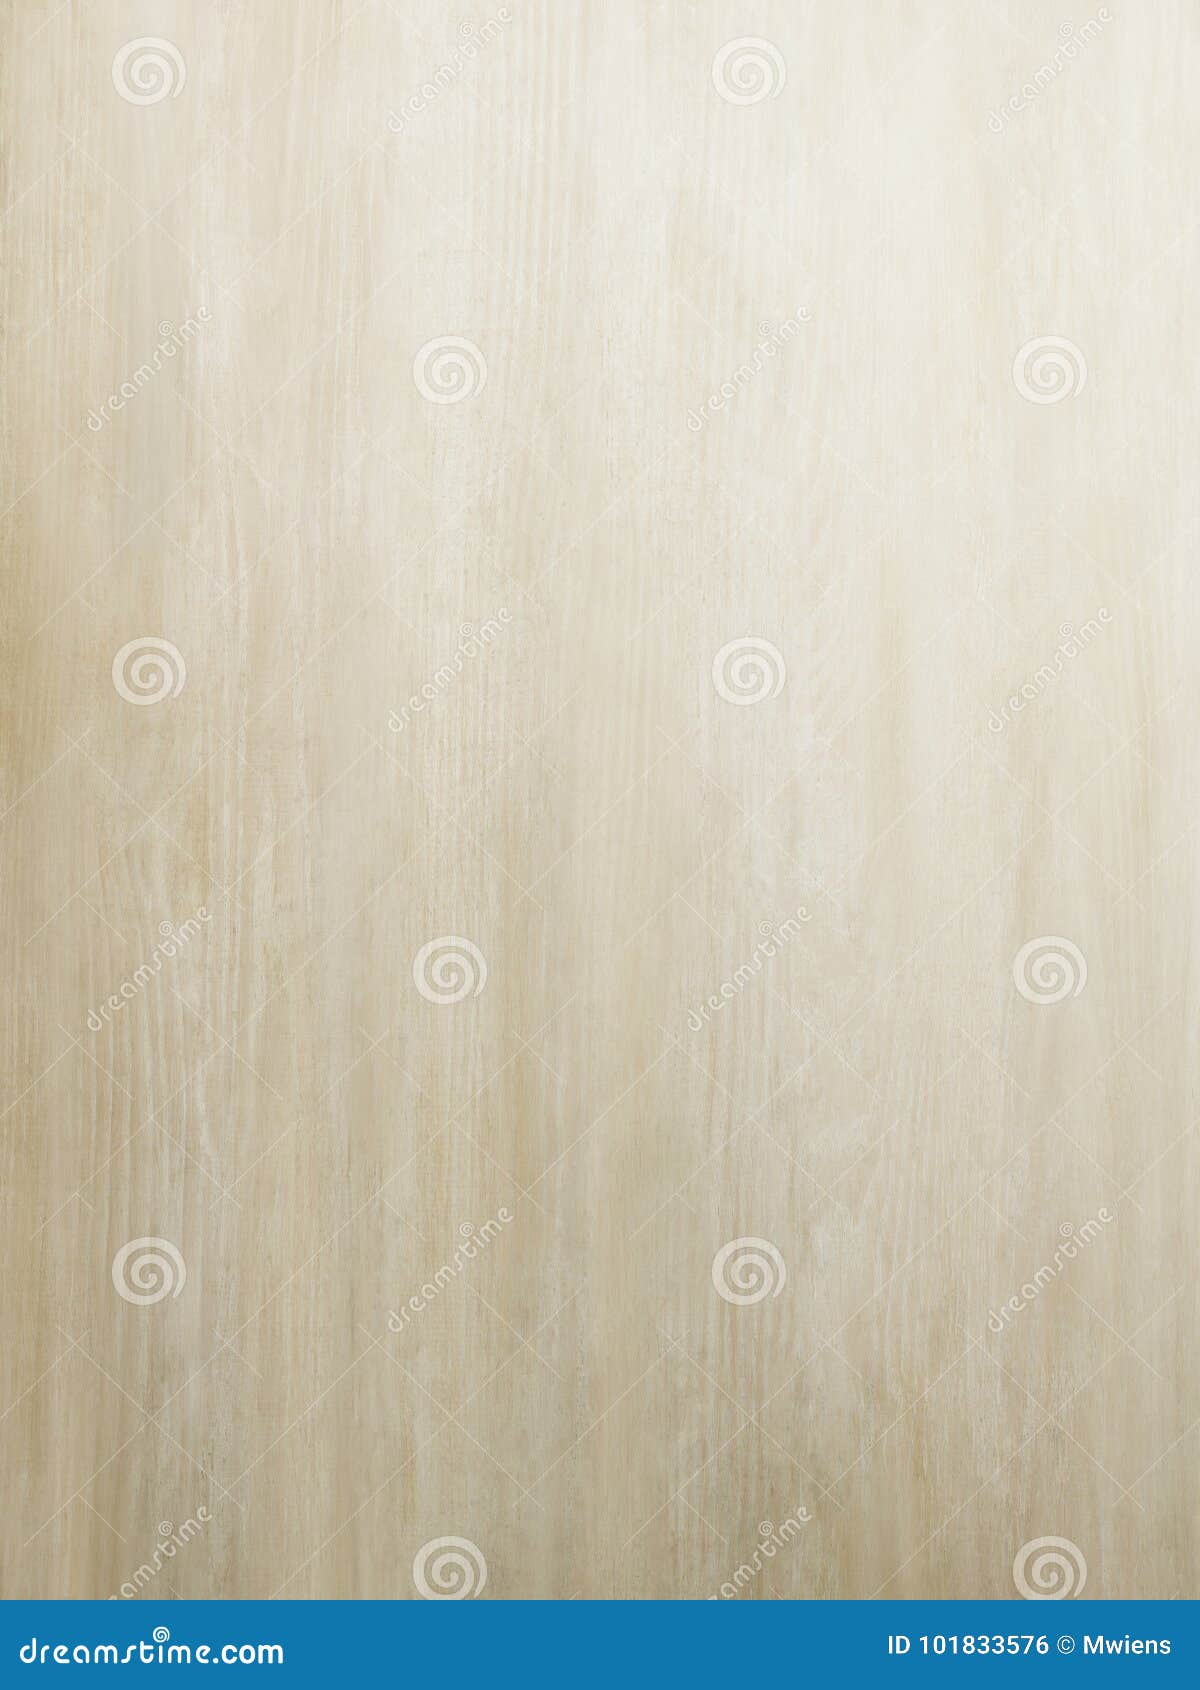 Faded Near White Tan Pickled Seamless Wood Background Fades To White Stock  Photo - Image of peeling, design: 101833576